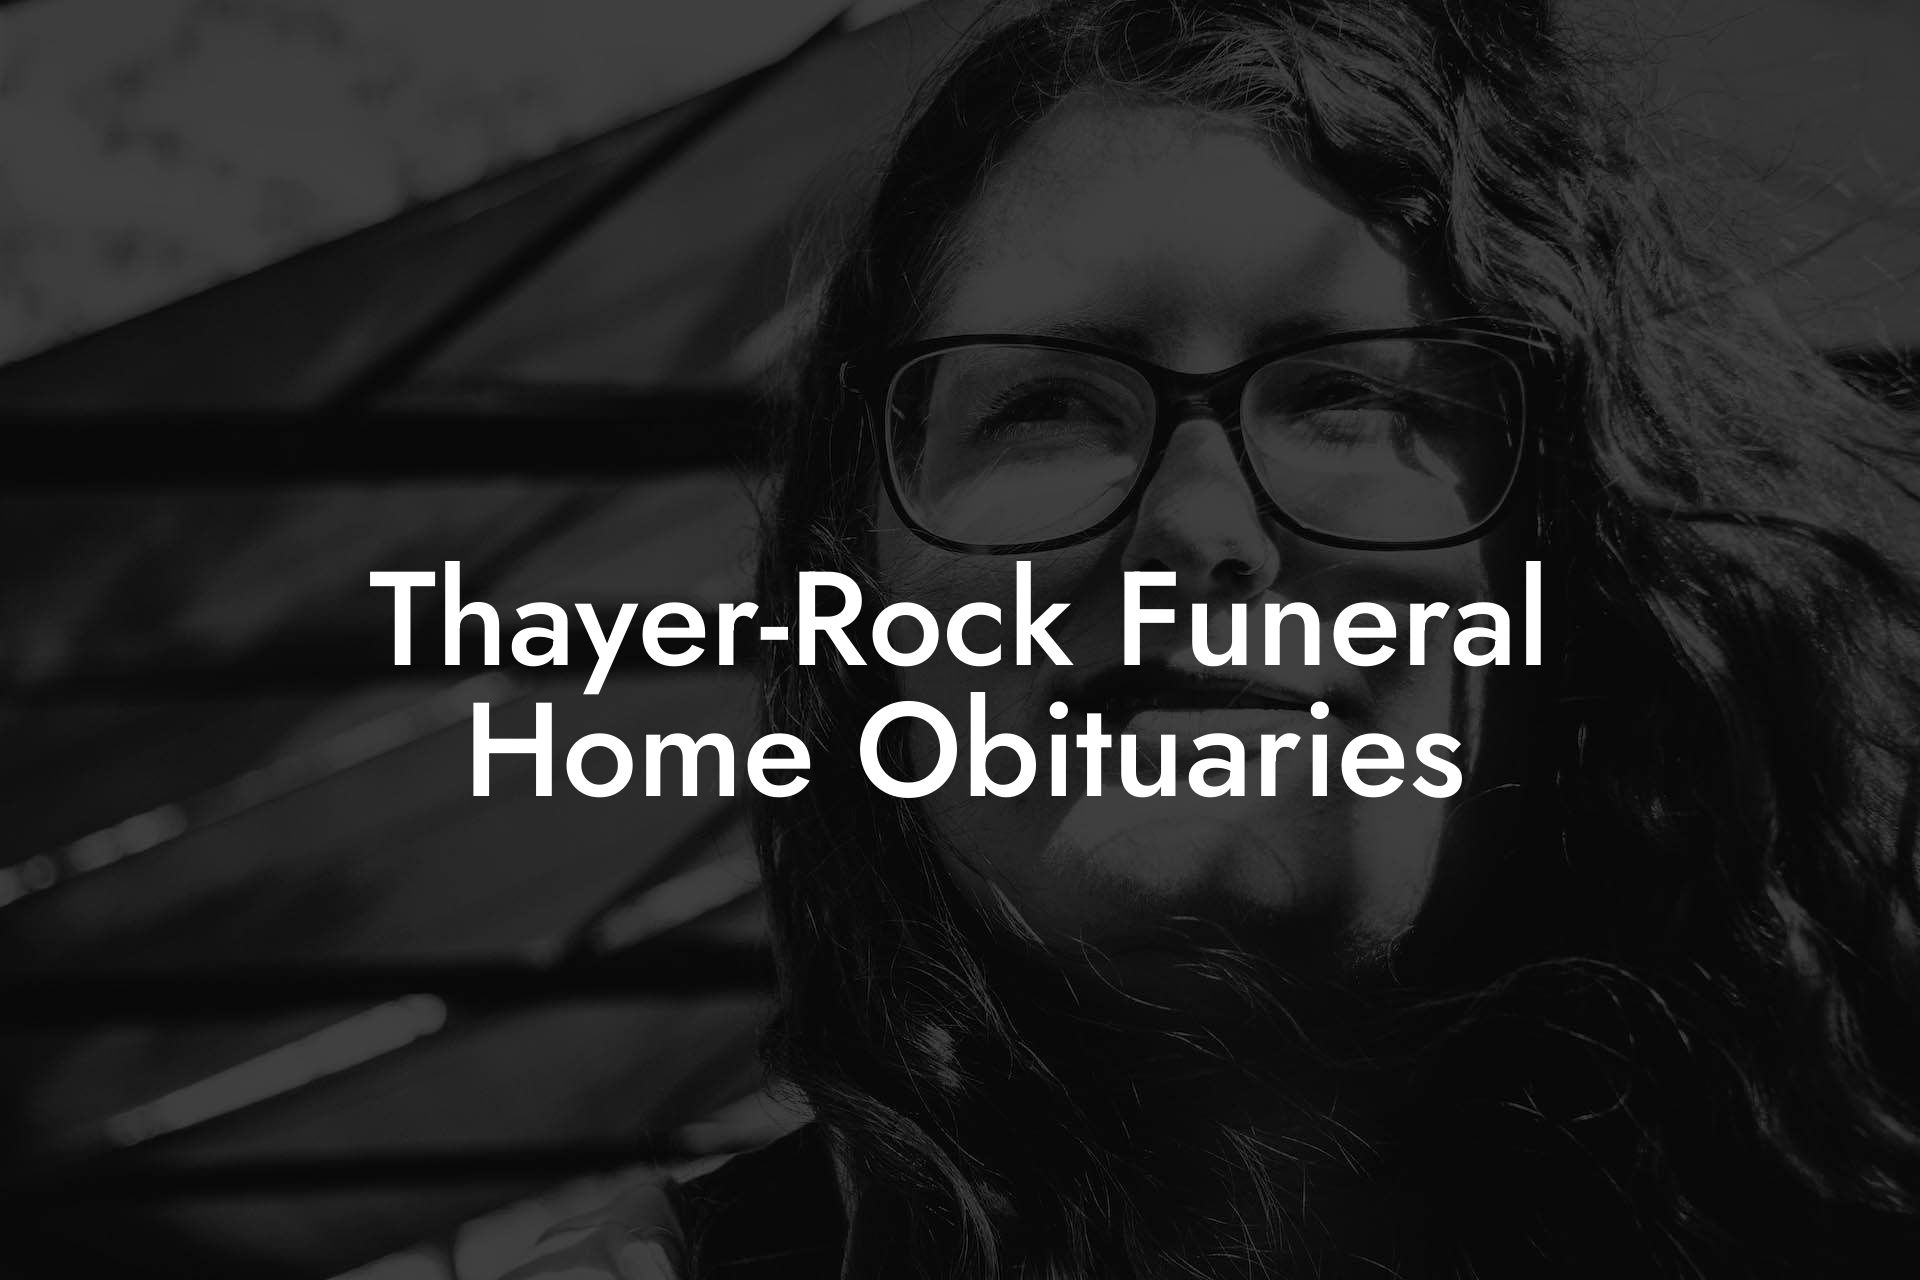 Thayer-Rock Funeral Home Obituaries